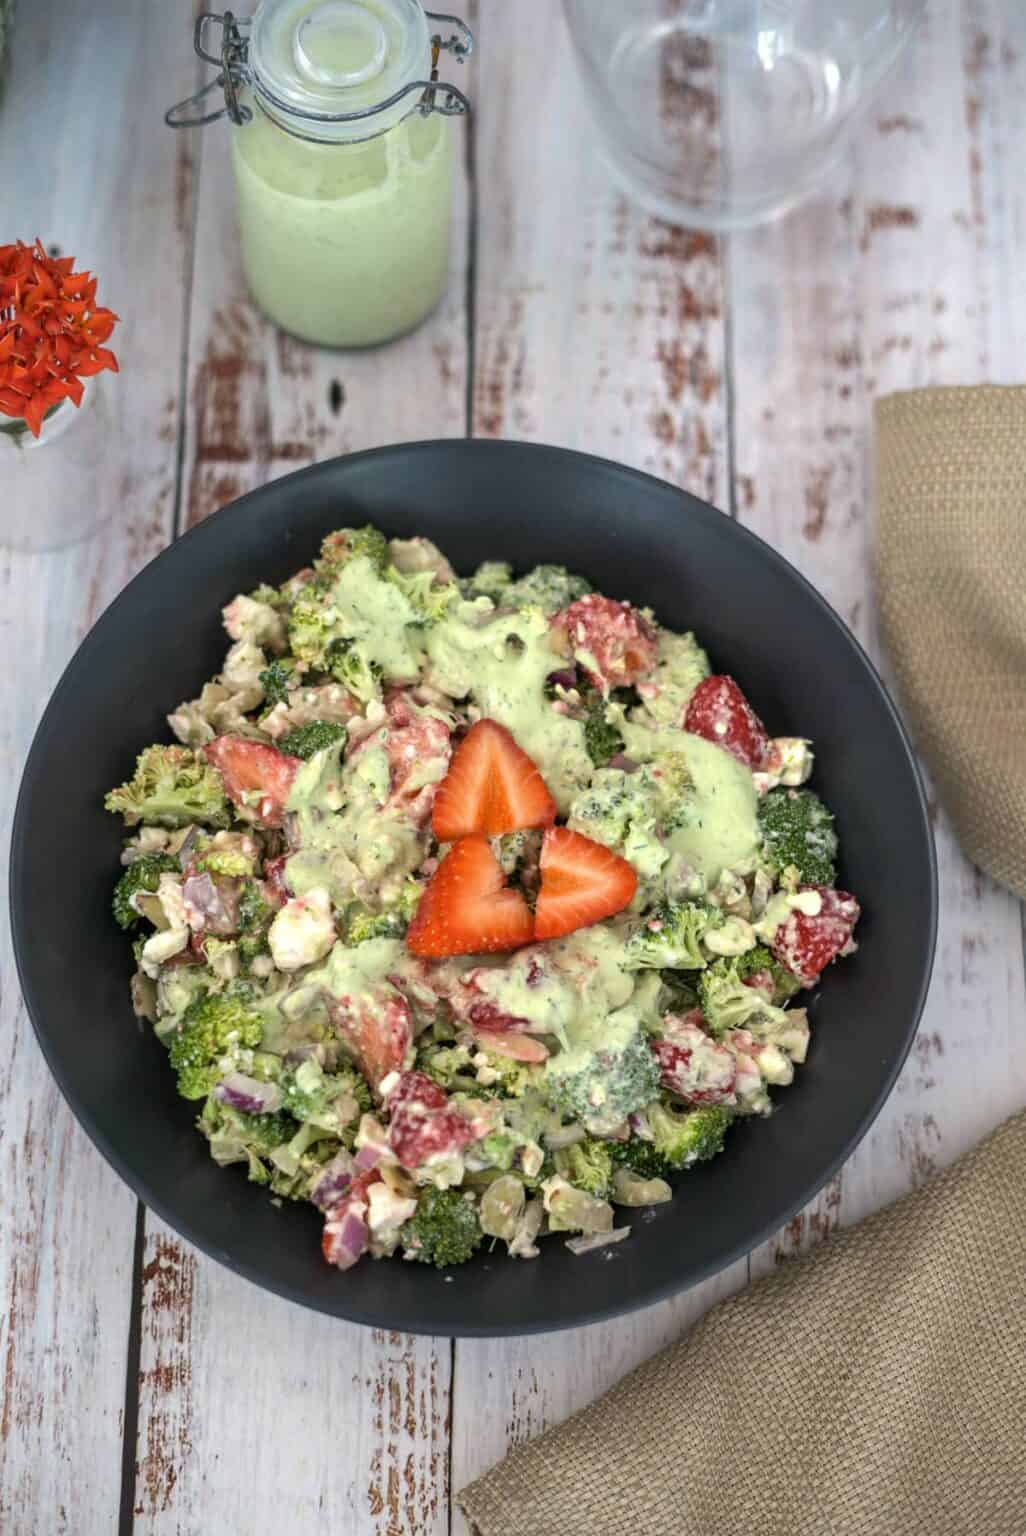 Overview of broccoli salad with strawberries and creamy dressing.